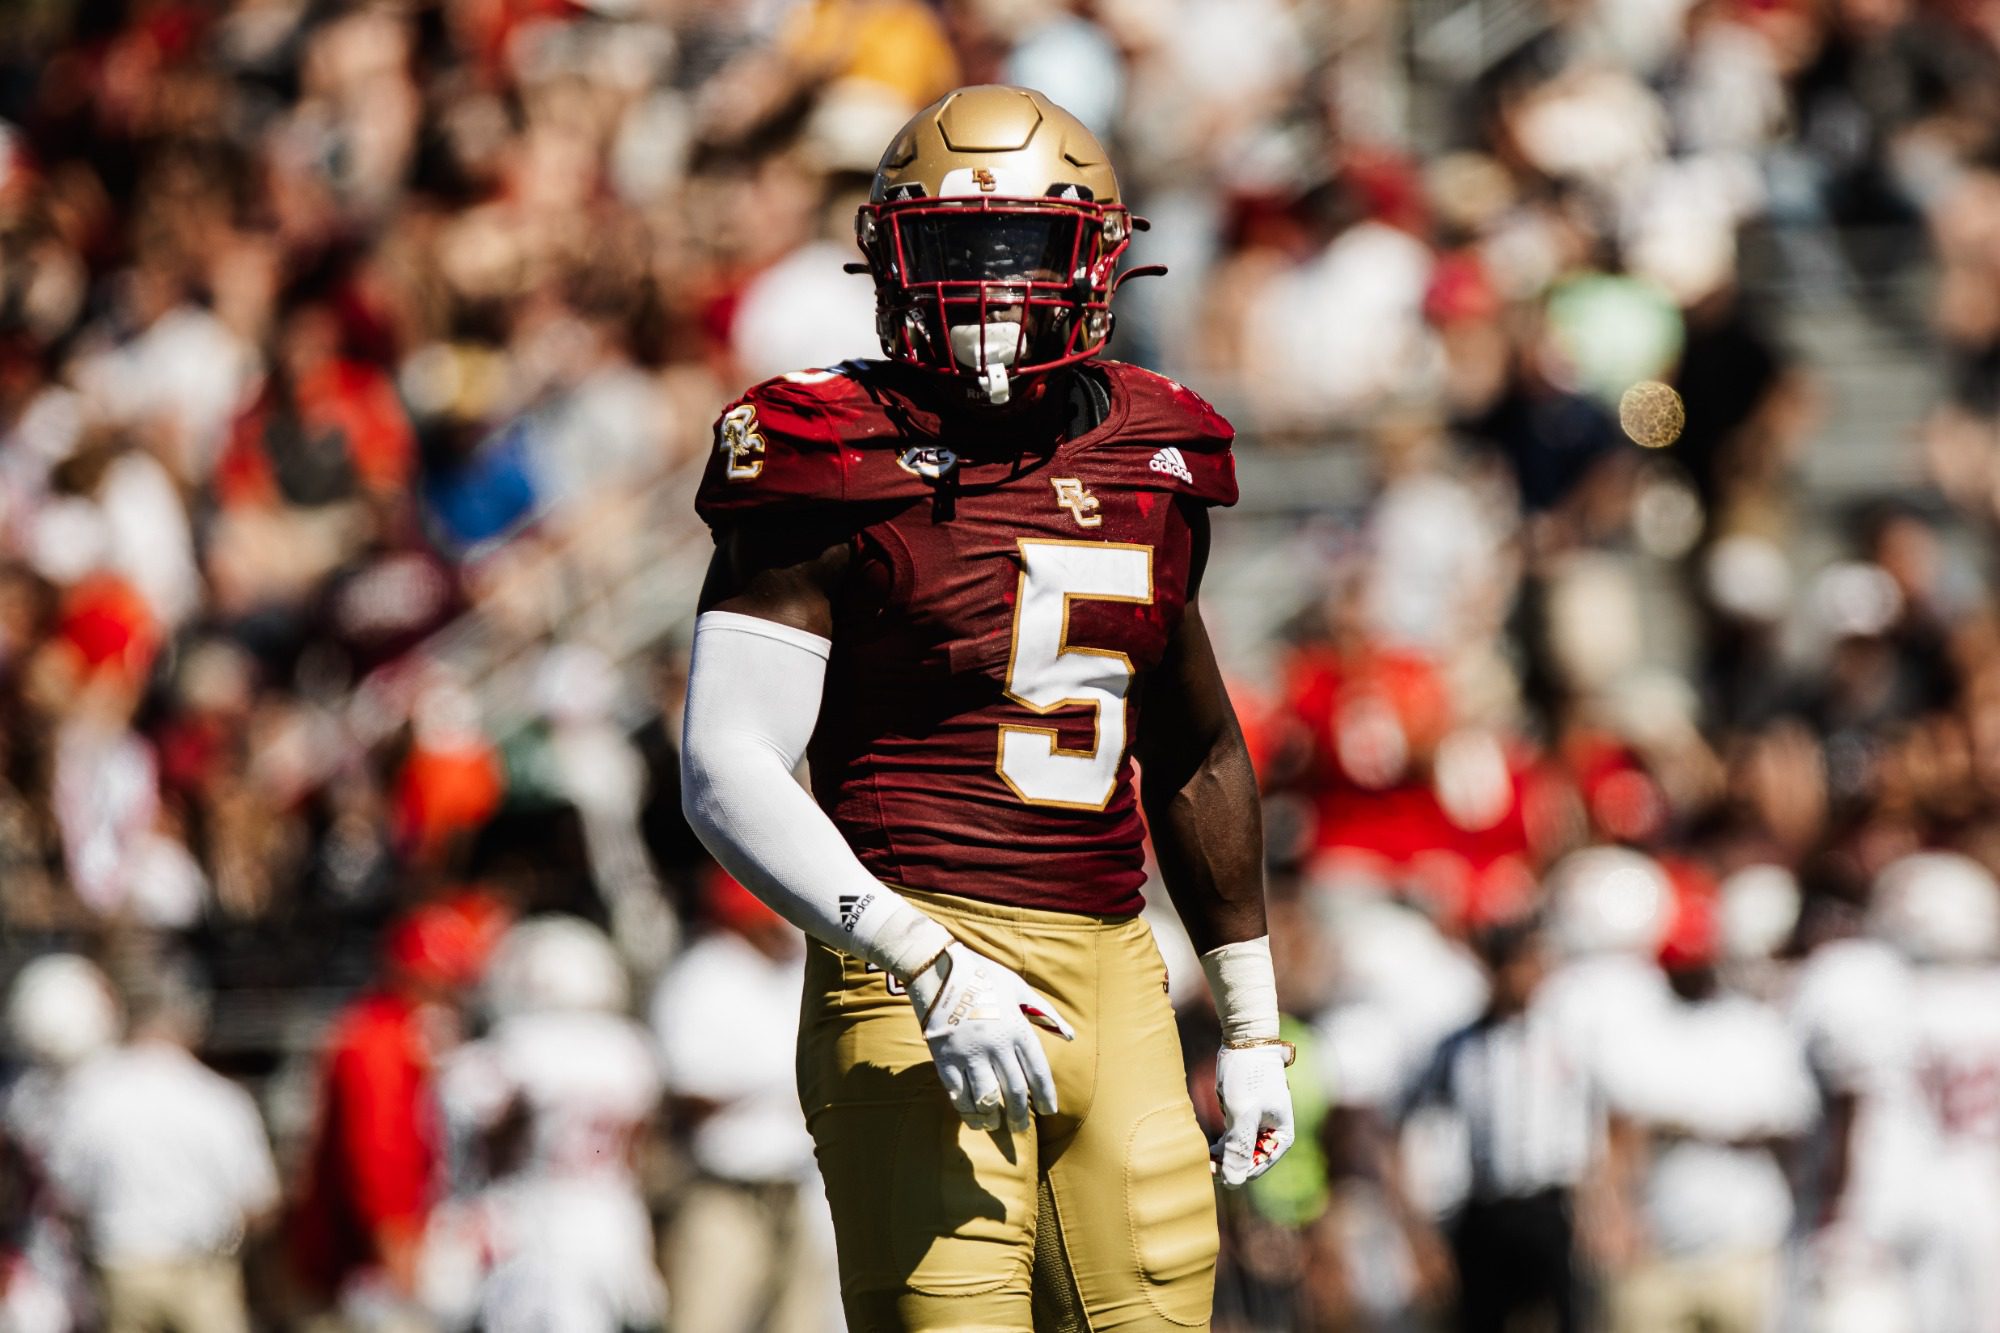 Kam Arnold is an intriguing prospect to keep an eye on. He's a defender at Boston College who offers a versatile skill set. Hula Bowl scout Justyce Gordon breaks down Arnold as an NFL Prospect in his report.